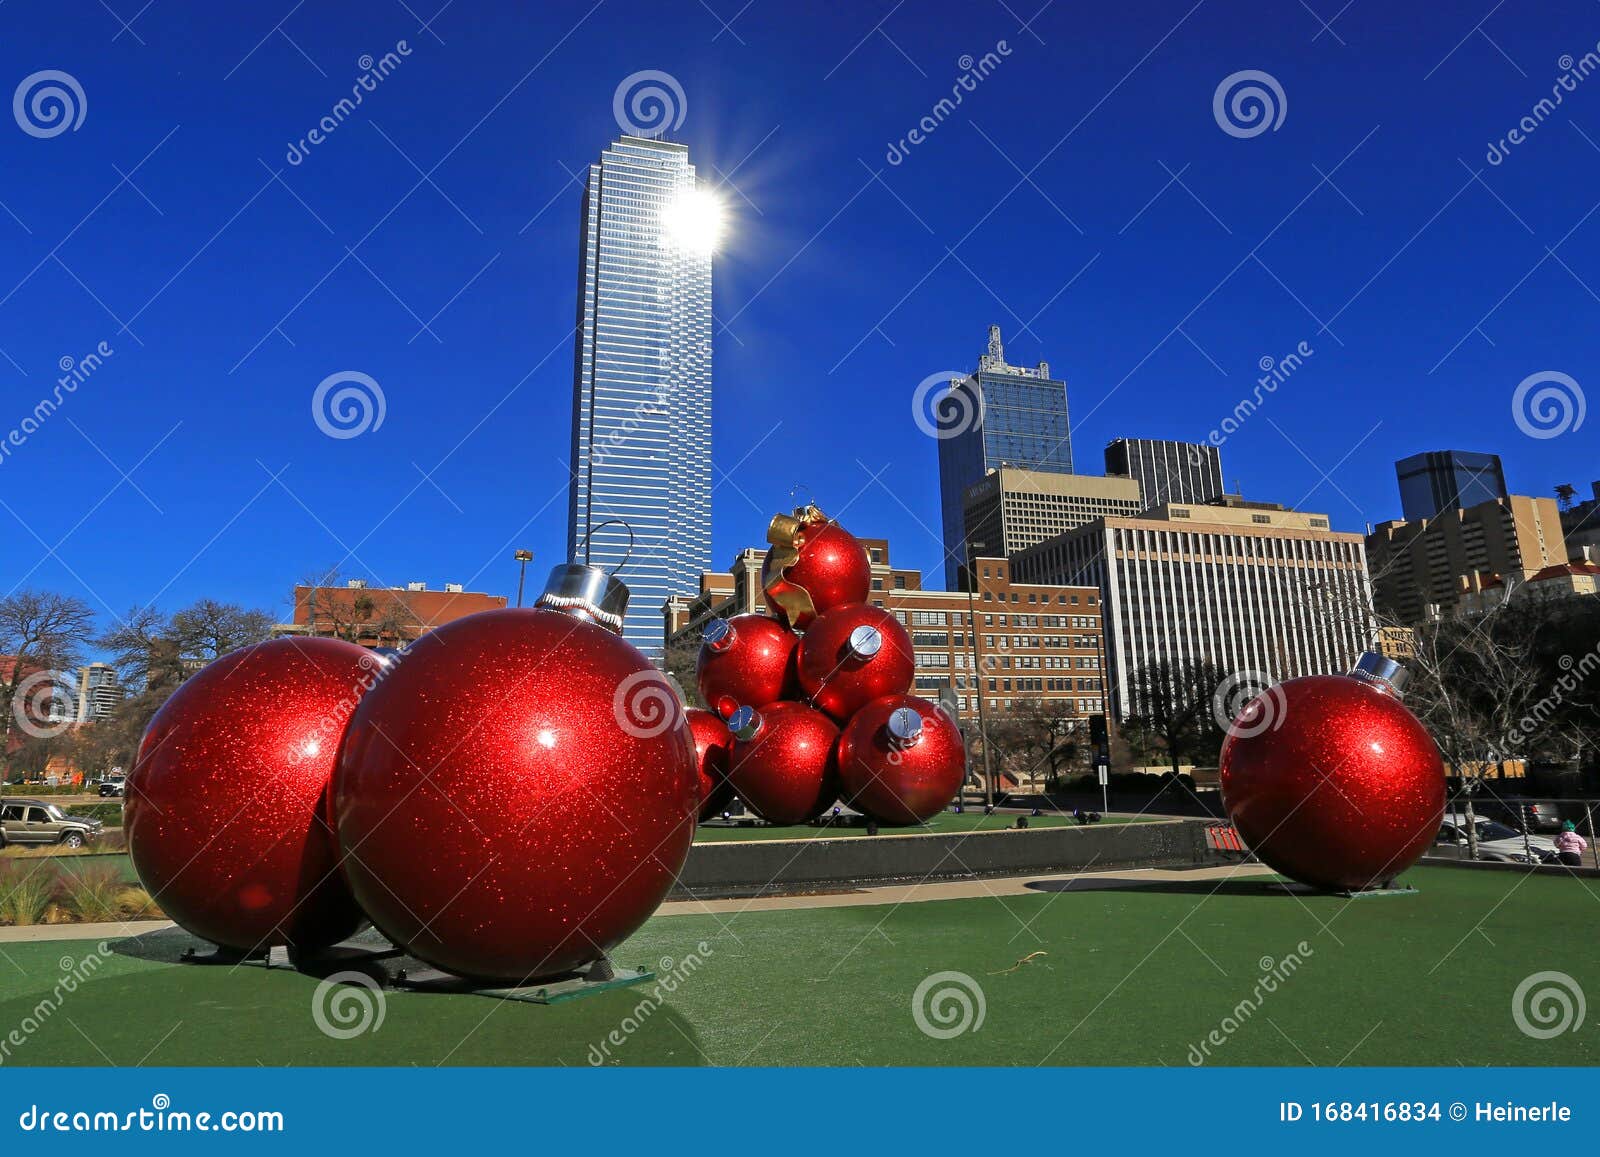 Christmas Decorations in Downtown Dallas Dec 2019 Editorial Stock Image